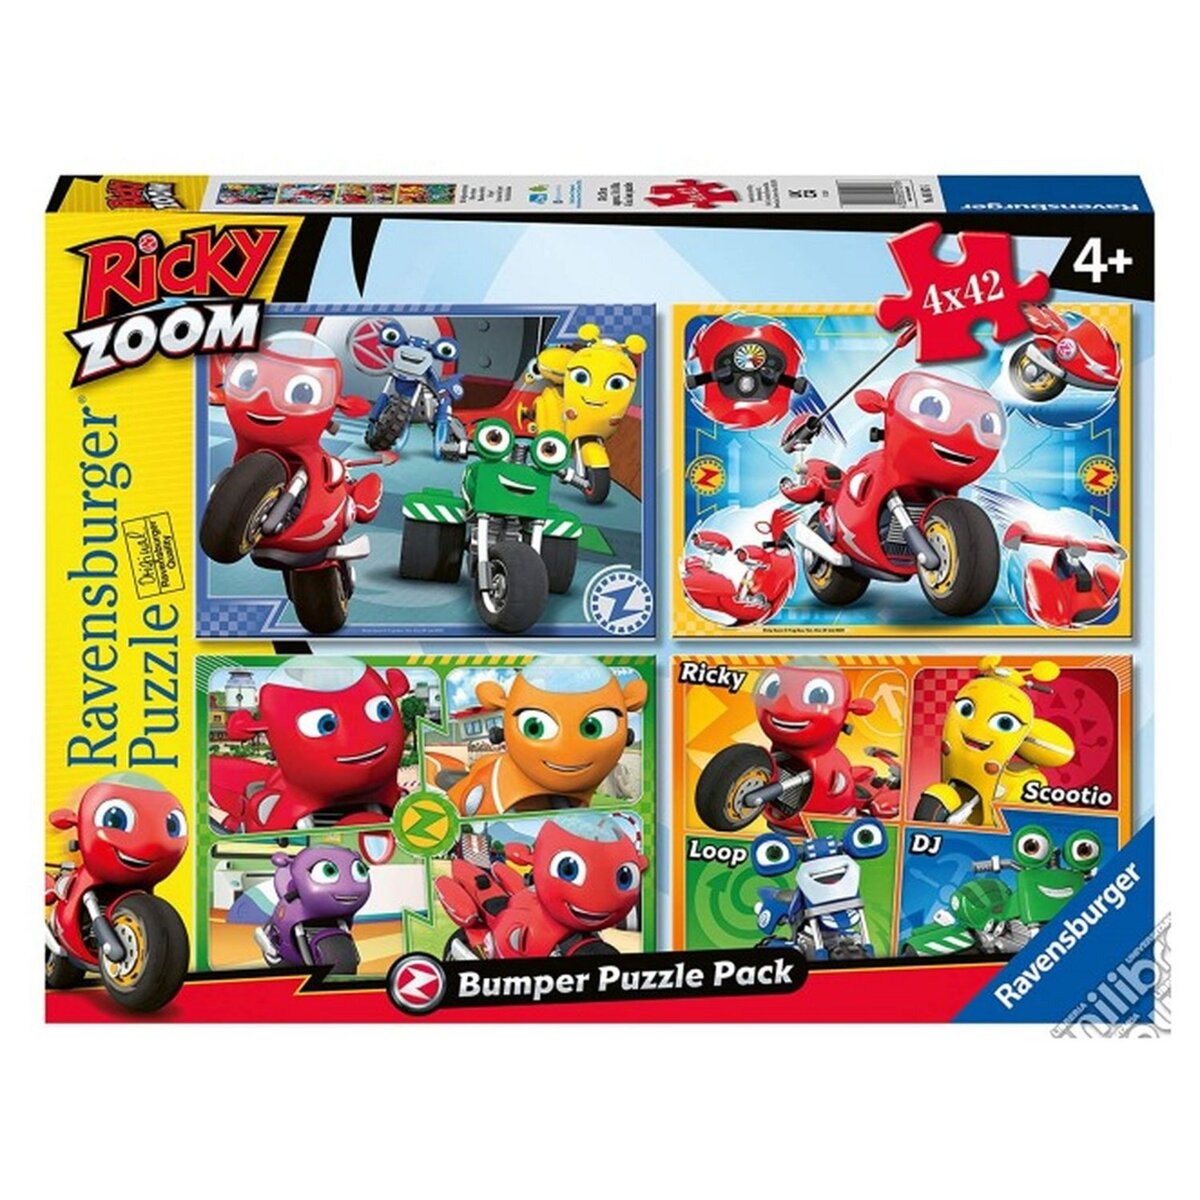 RAVENSBURGER Puzzle Ricky Zoom 4x42 pièces